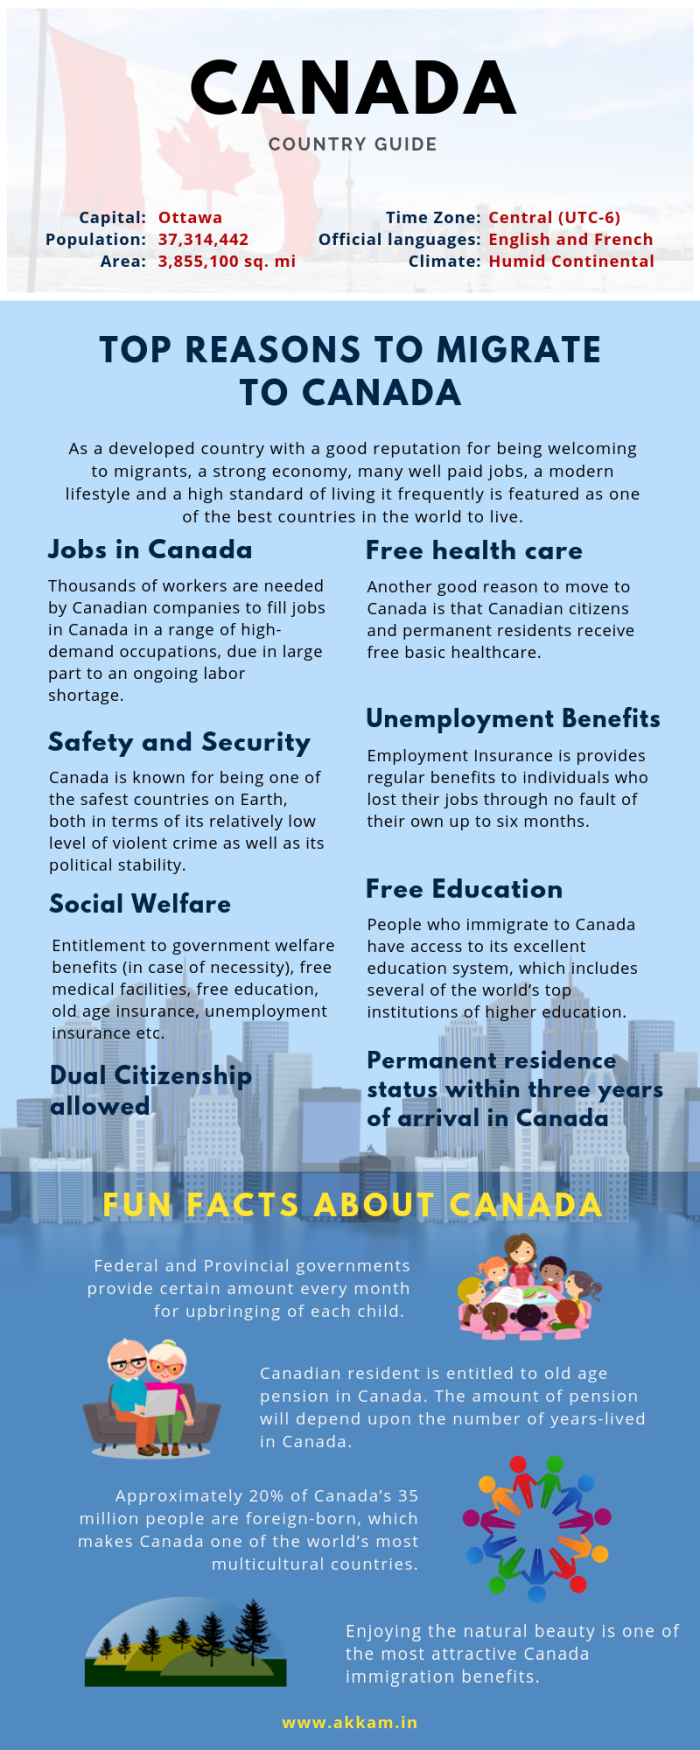 TOP REASONS TO MIGRATE TO CANADA